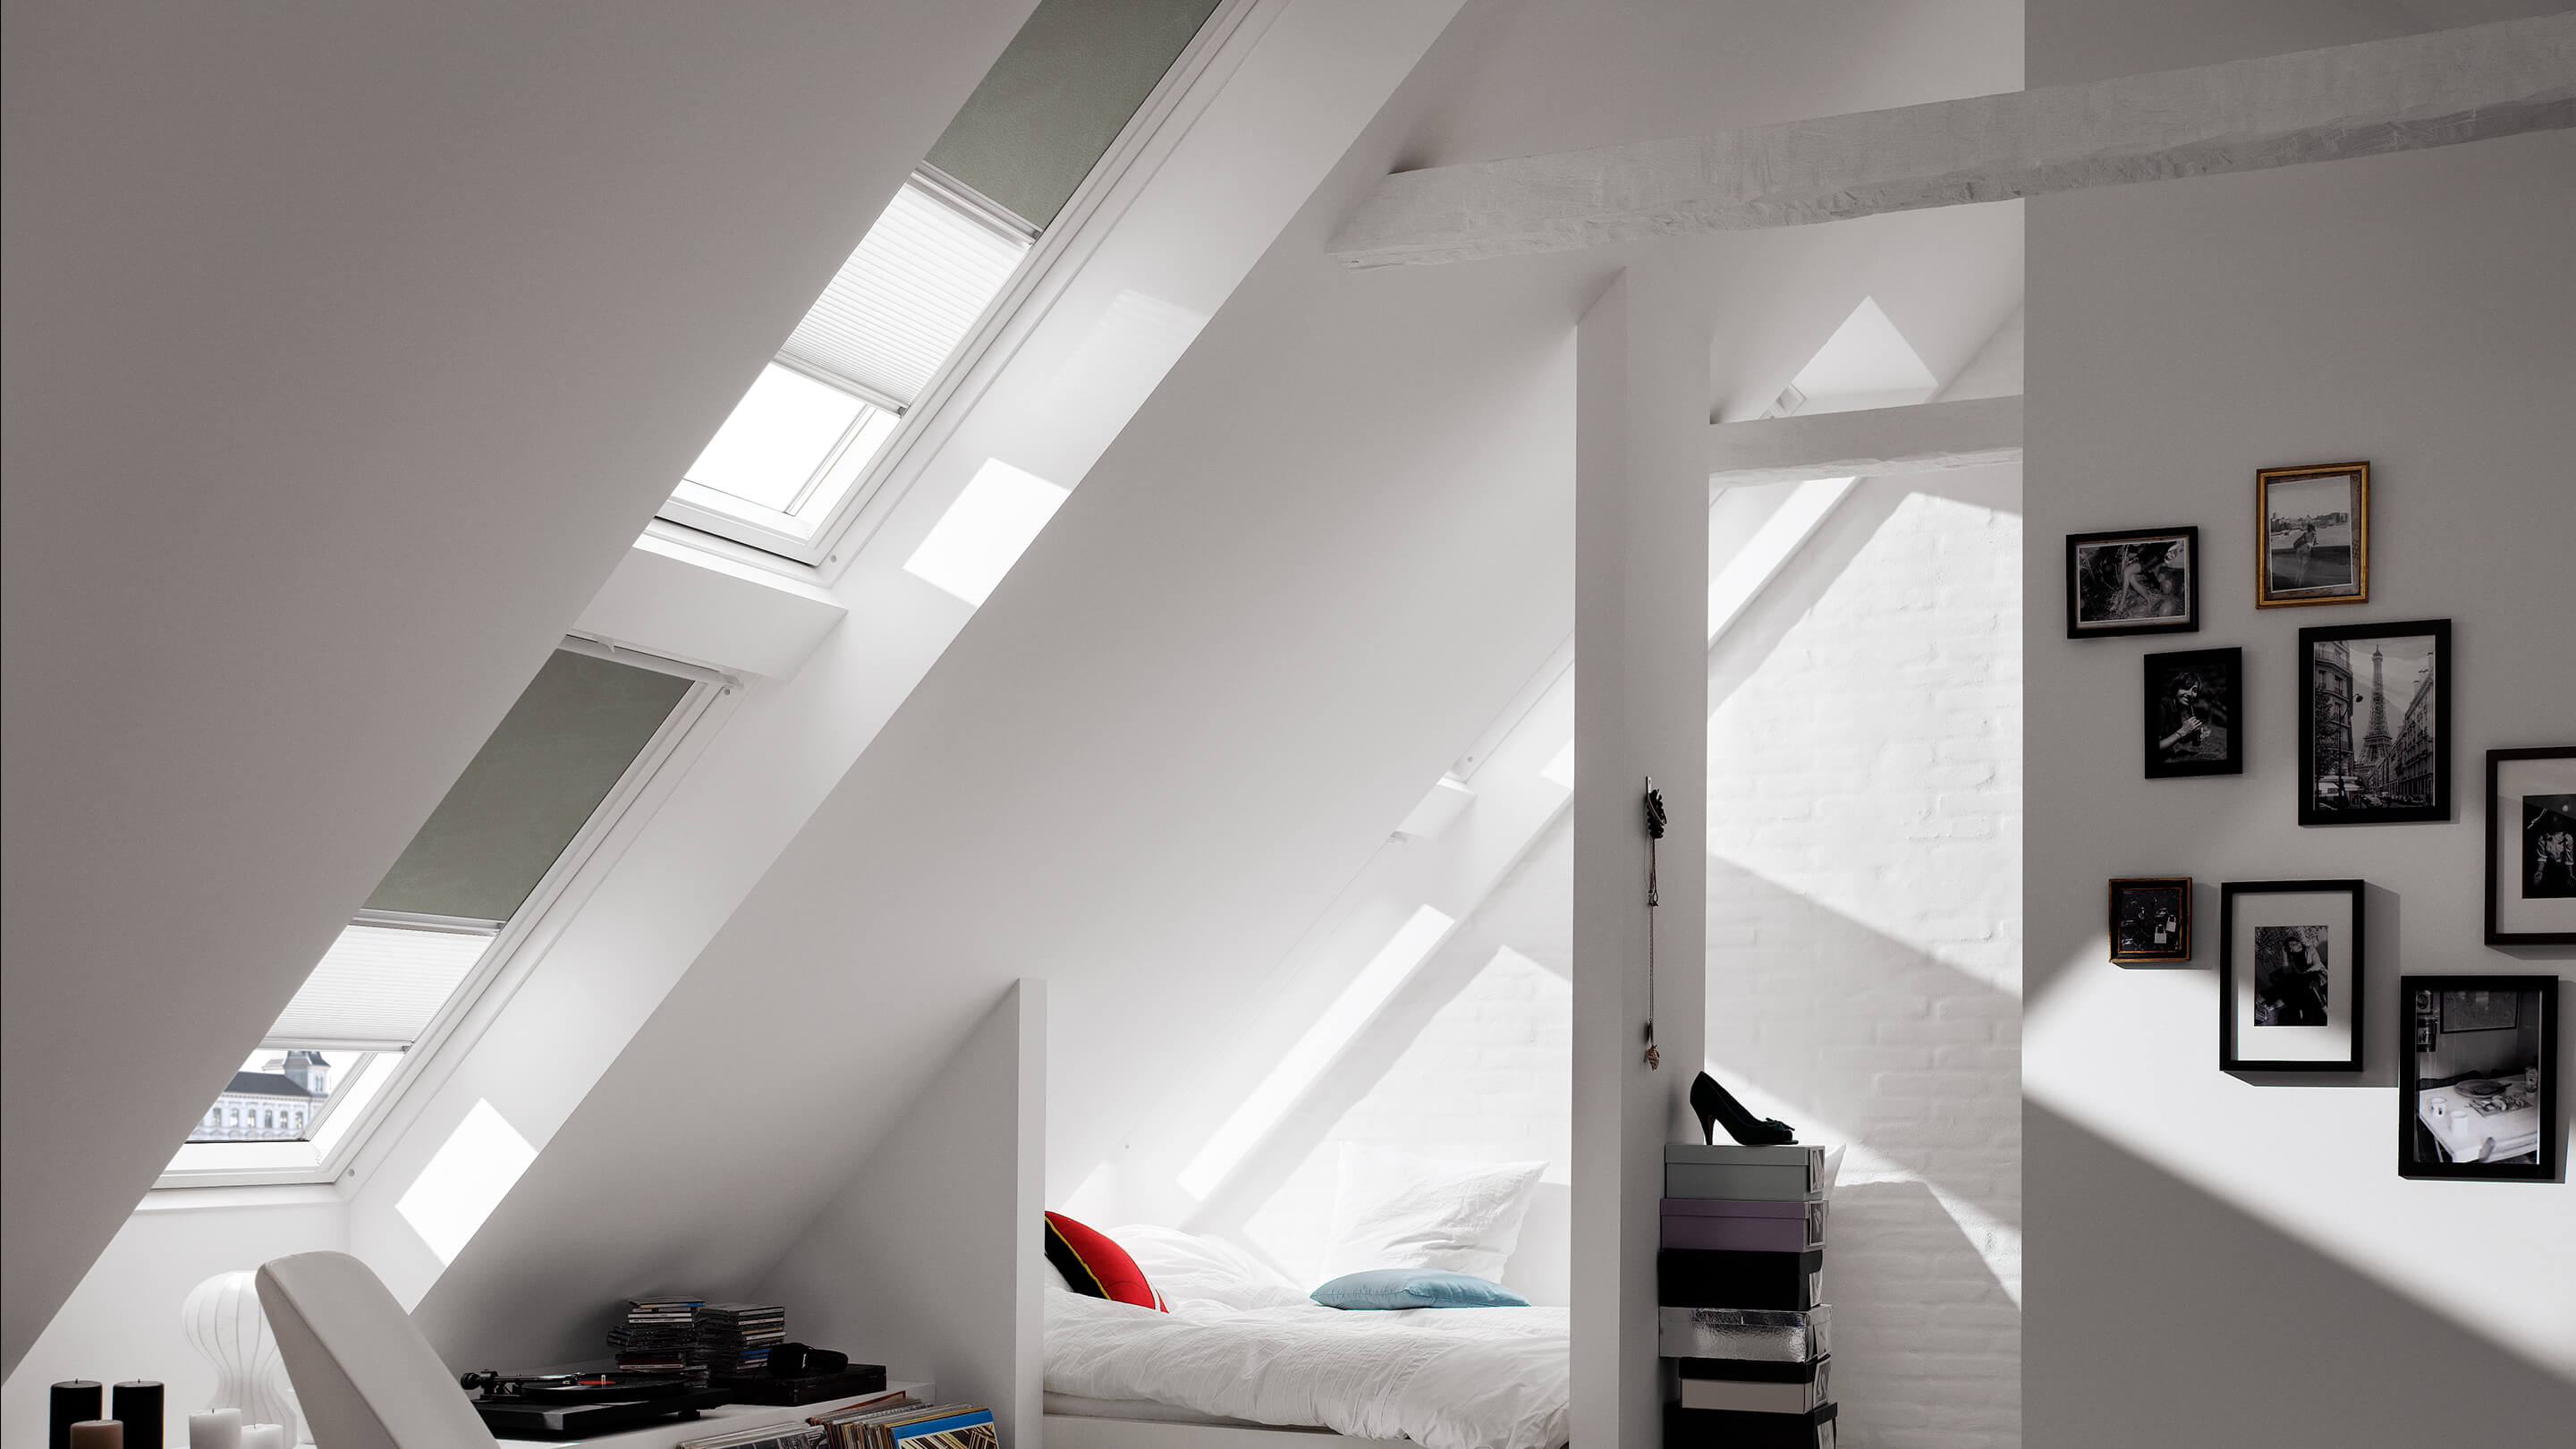 VELUX duo blackout roller blind for roof windows installed in multiple VELUX roof windows seen from the inside